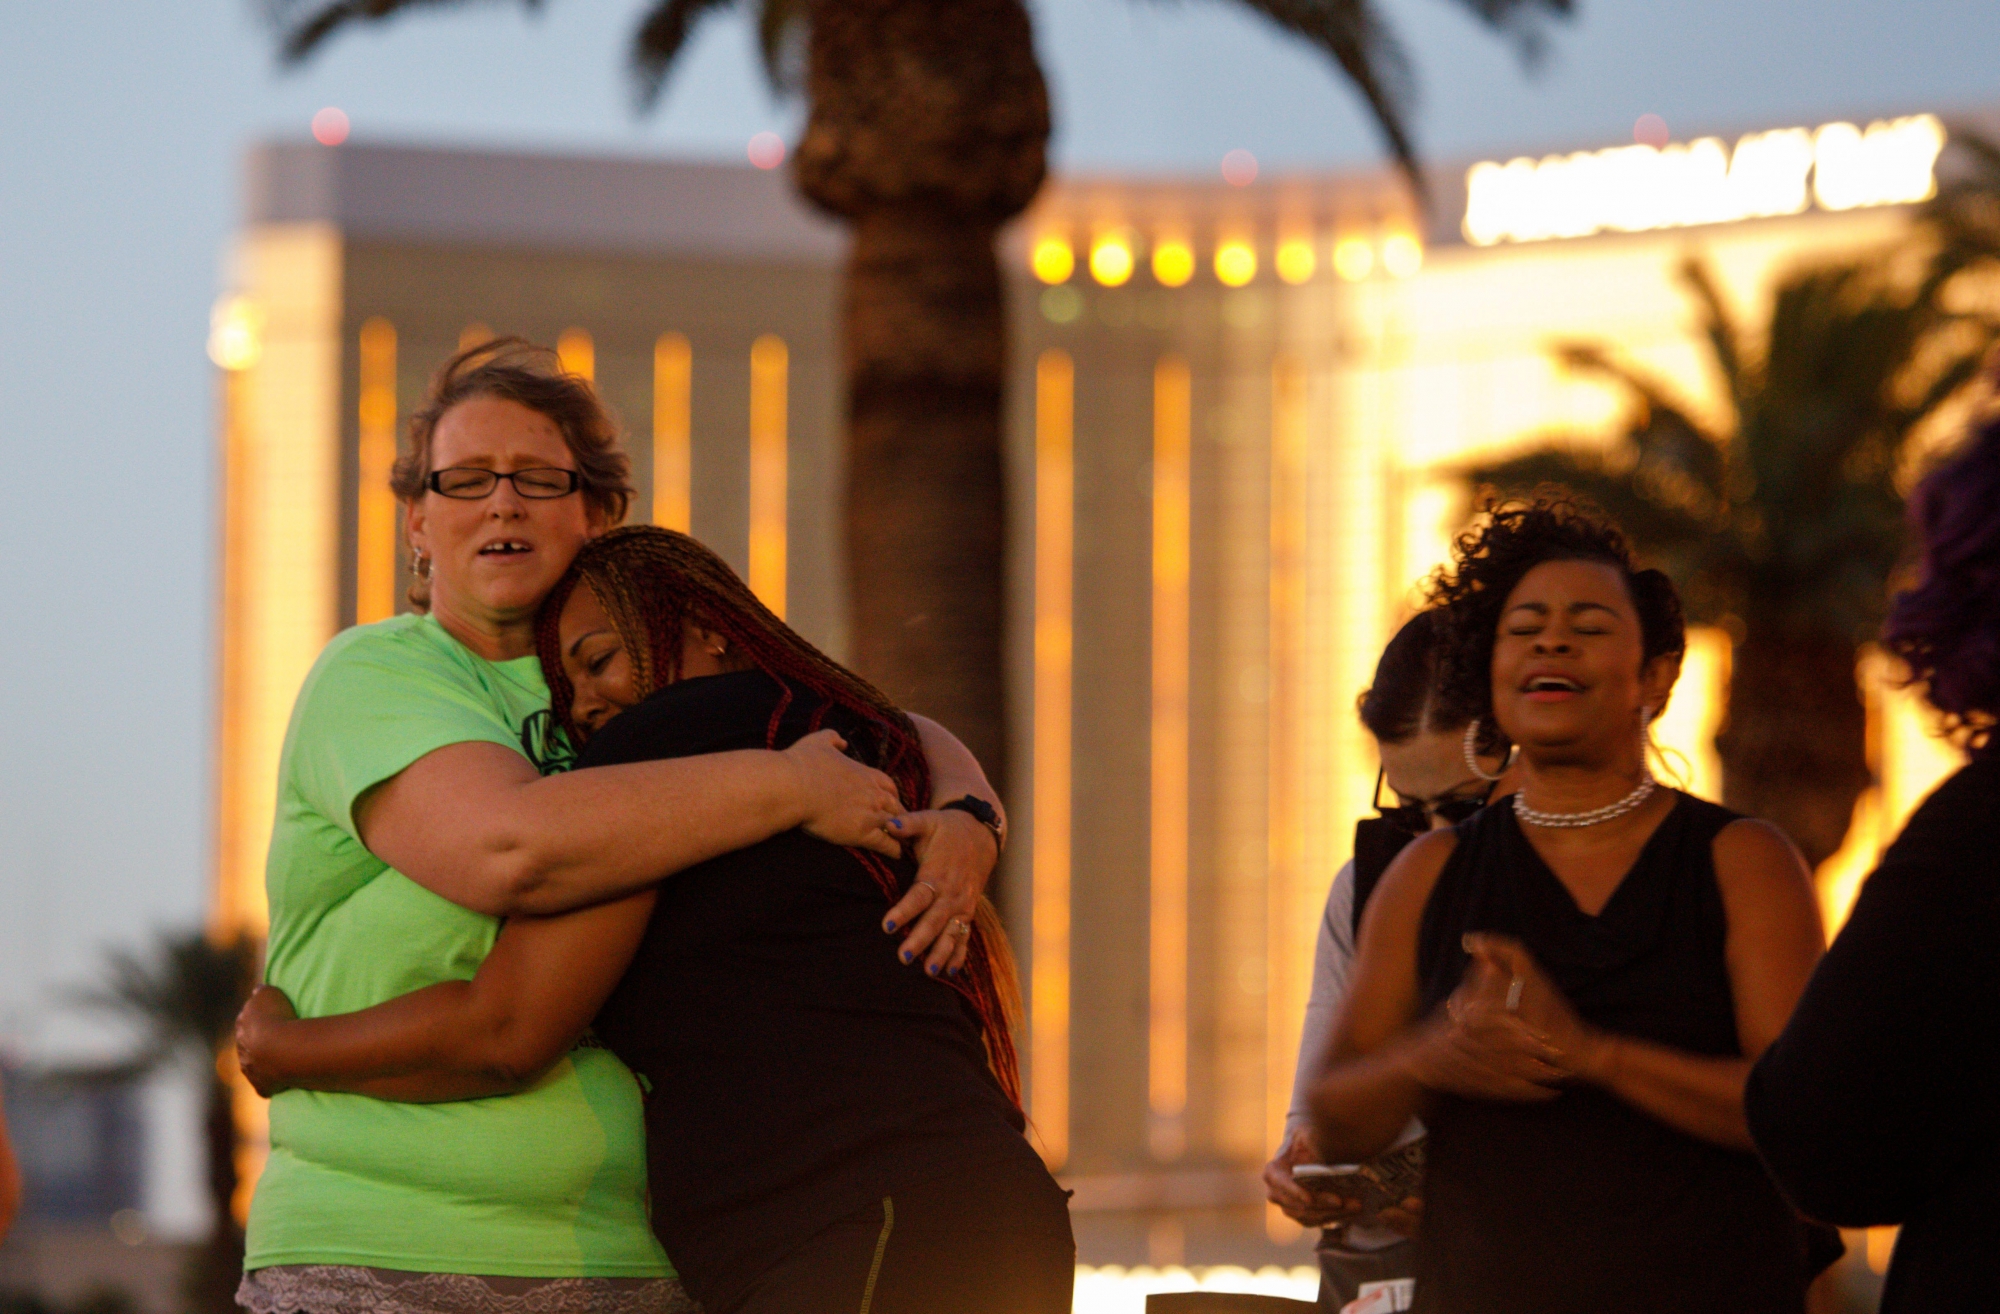 epa06243336 Parishioners from The Gathering church pray near the Mandalay Bay hotel in memory of the victims of the mass shooting in Las Vegas, Nevada, USA, 03 October 2017. Police reports indicate that a gunman, identified as Stephen Paddock, 64, firing from an upper floor in the Mandalay Bay hotel killed 58 people and injured more than 500 before he reportedly killed himself as police made their way to his hotel room.  EPA/EUGENE GARCIA USA LAS VEGAS MASS SHOOTING